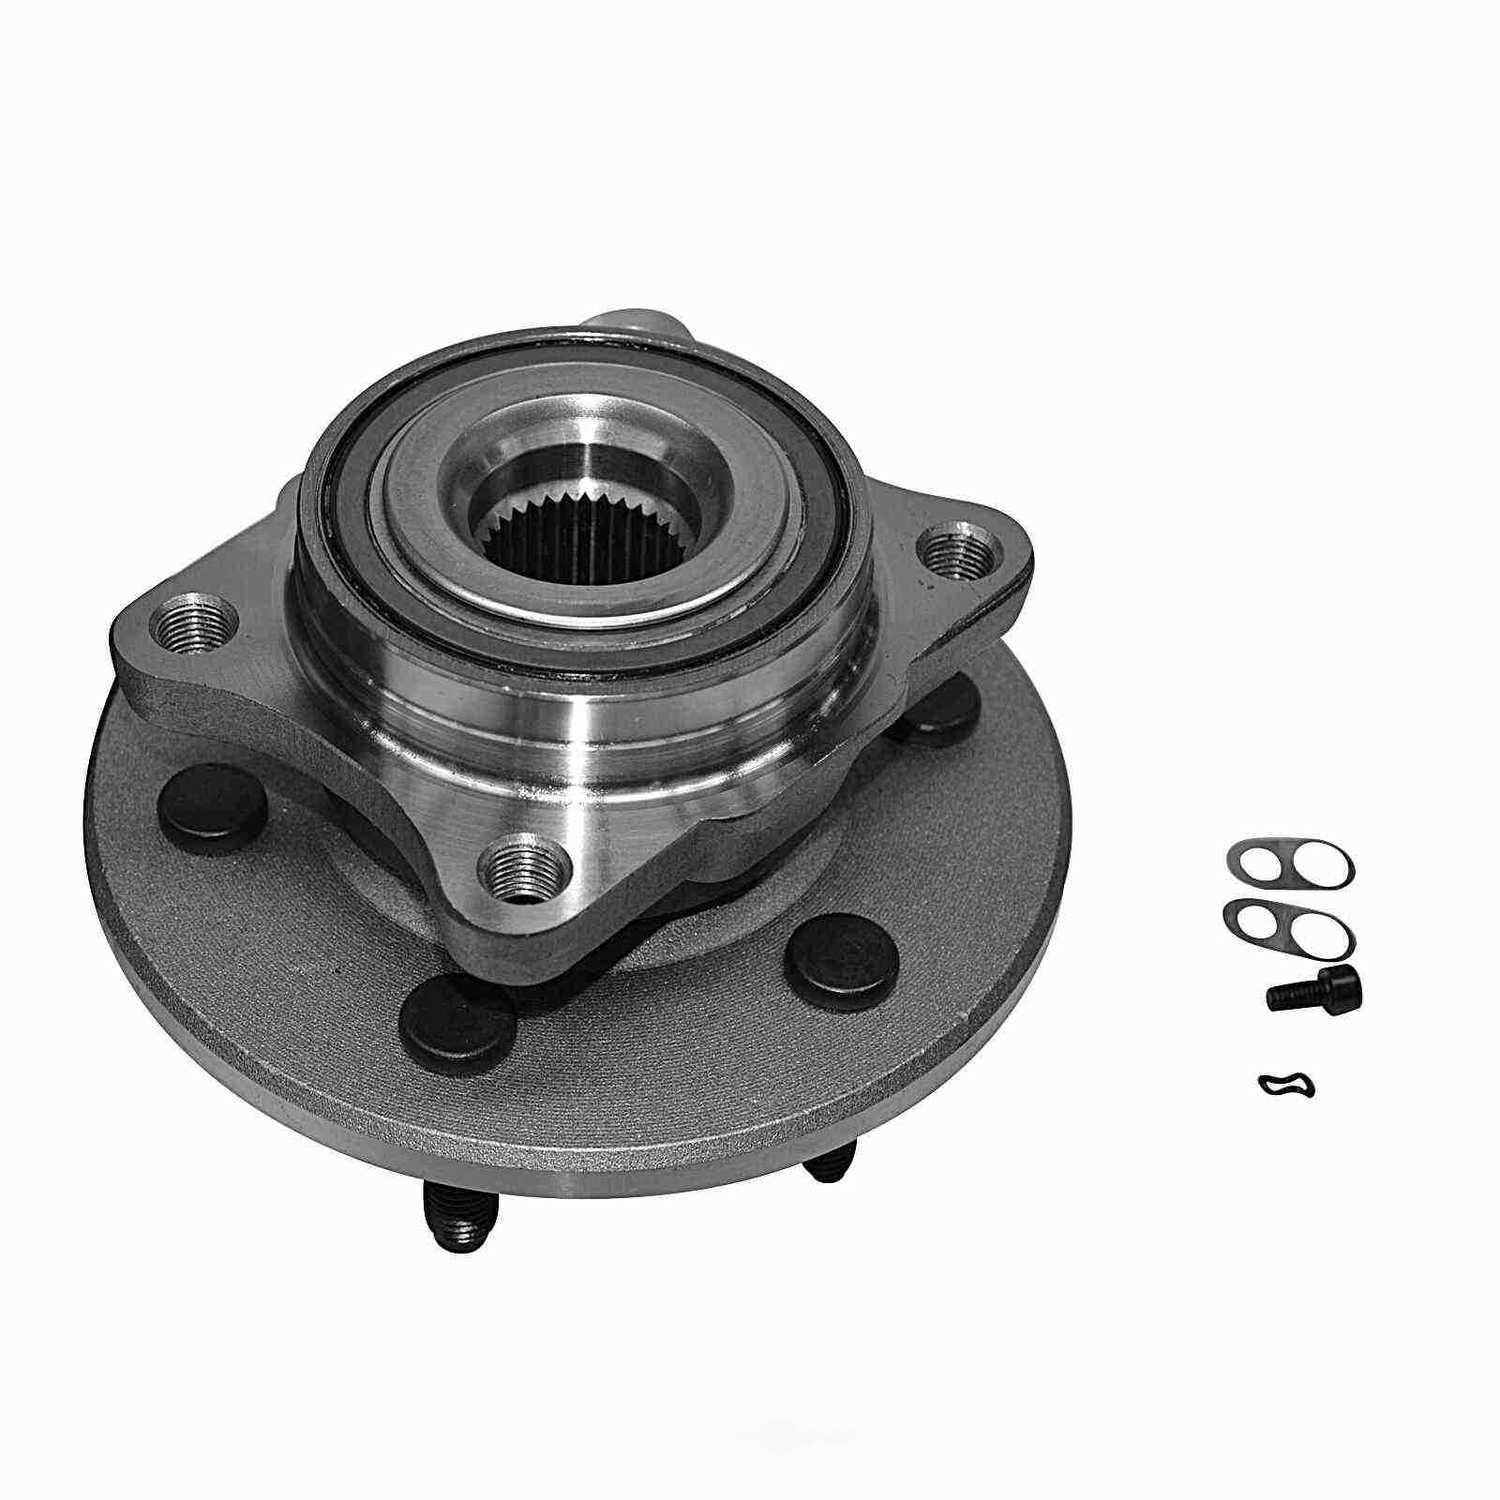 GSP NORTH AMERICA INC. - GSP New Wheel Bearing and Hub Assembly - AD8 122008